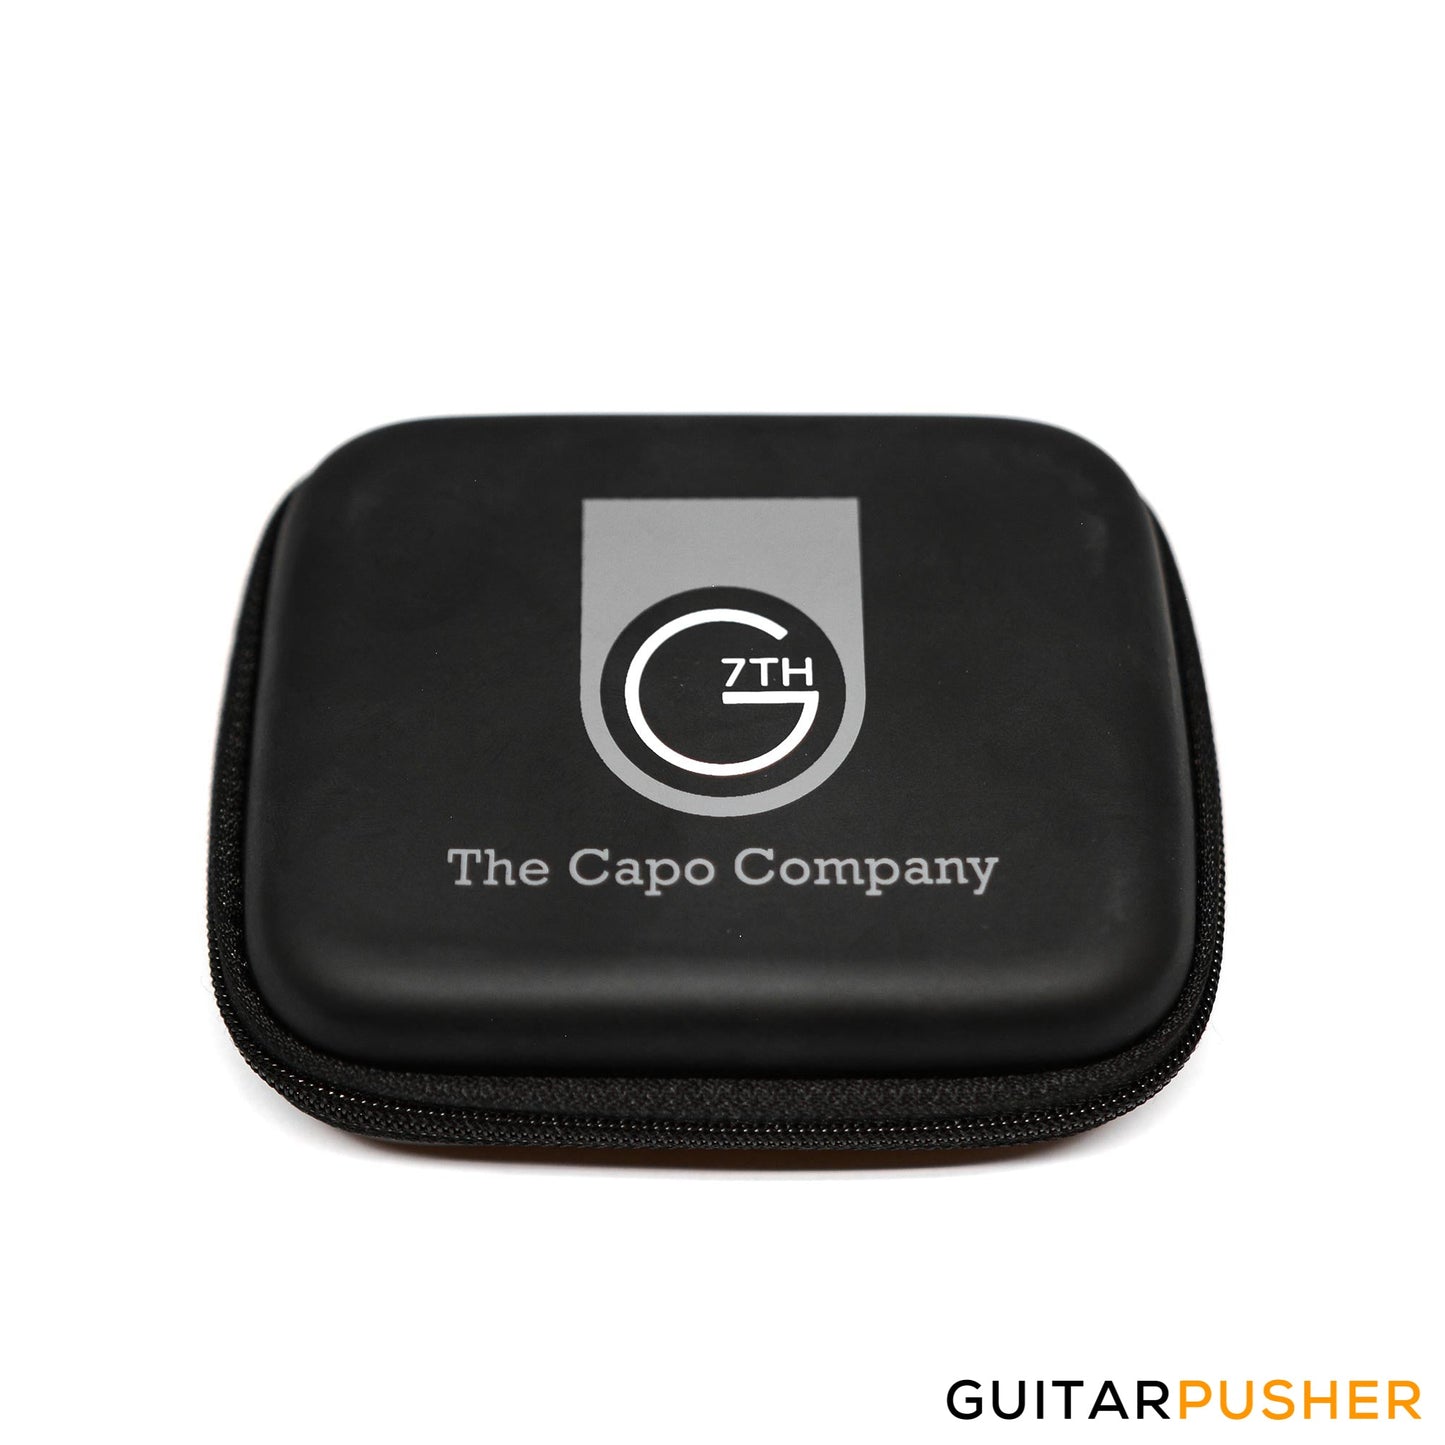 G7th Zip Case for Performance 3 Capo